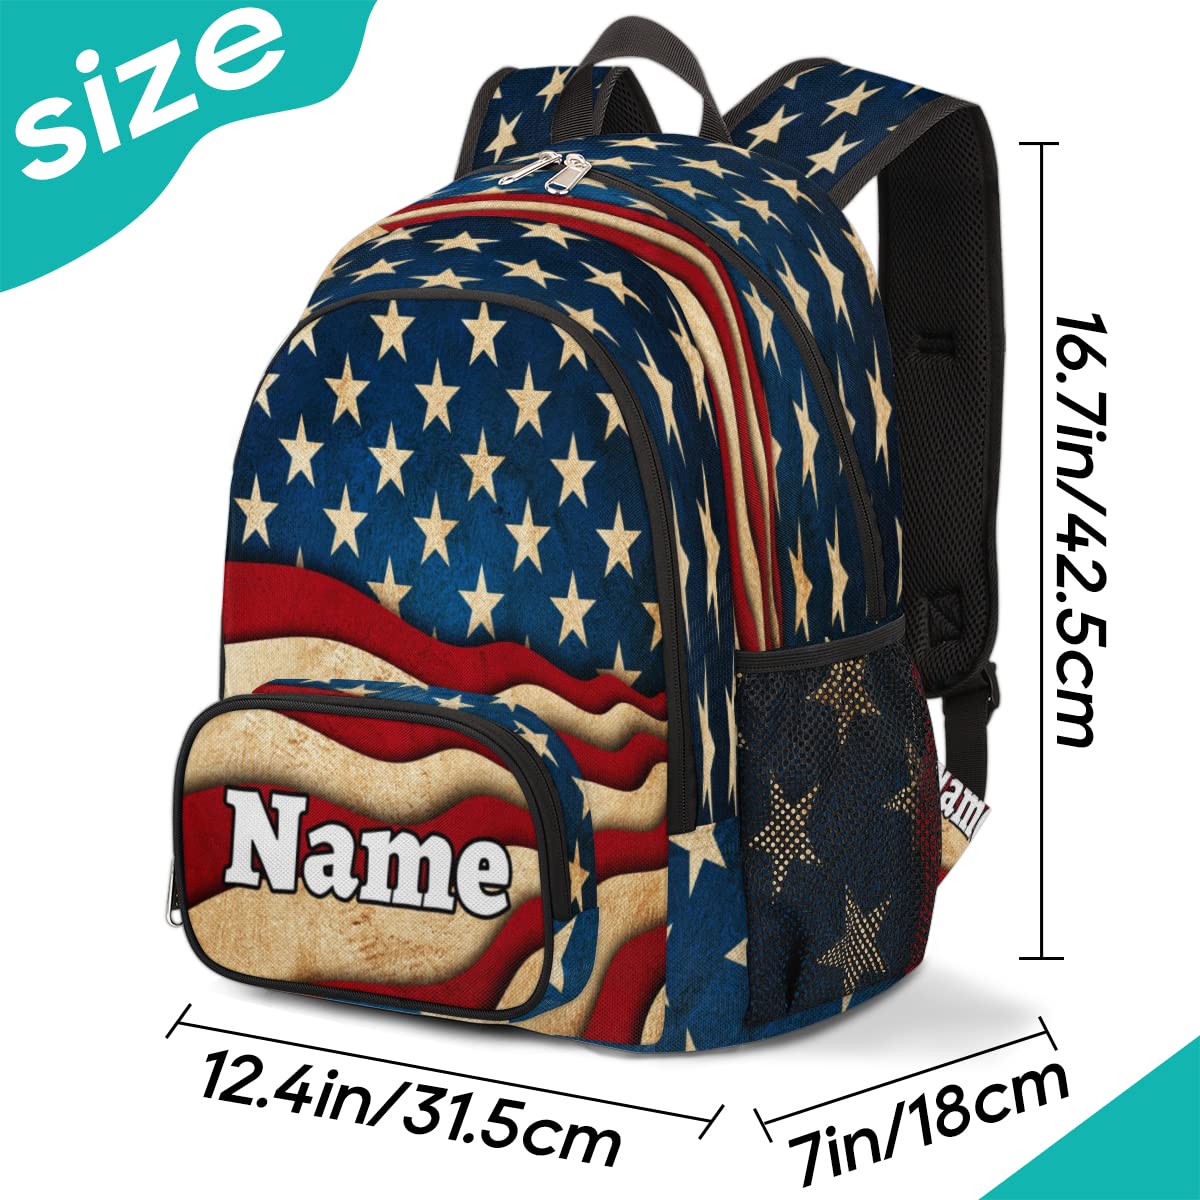 Herdesigns American Flag Custom Backpack for Men Women Adult 4th of July Personalized Lightweight Casual Laptop Backpack Customized Computer Hiking Gym Travel Travel Daypack with Name